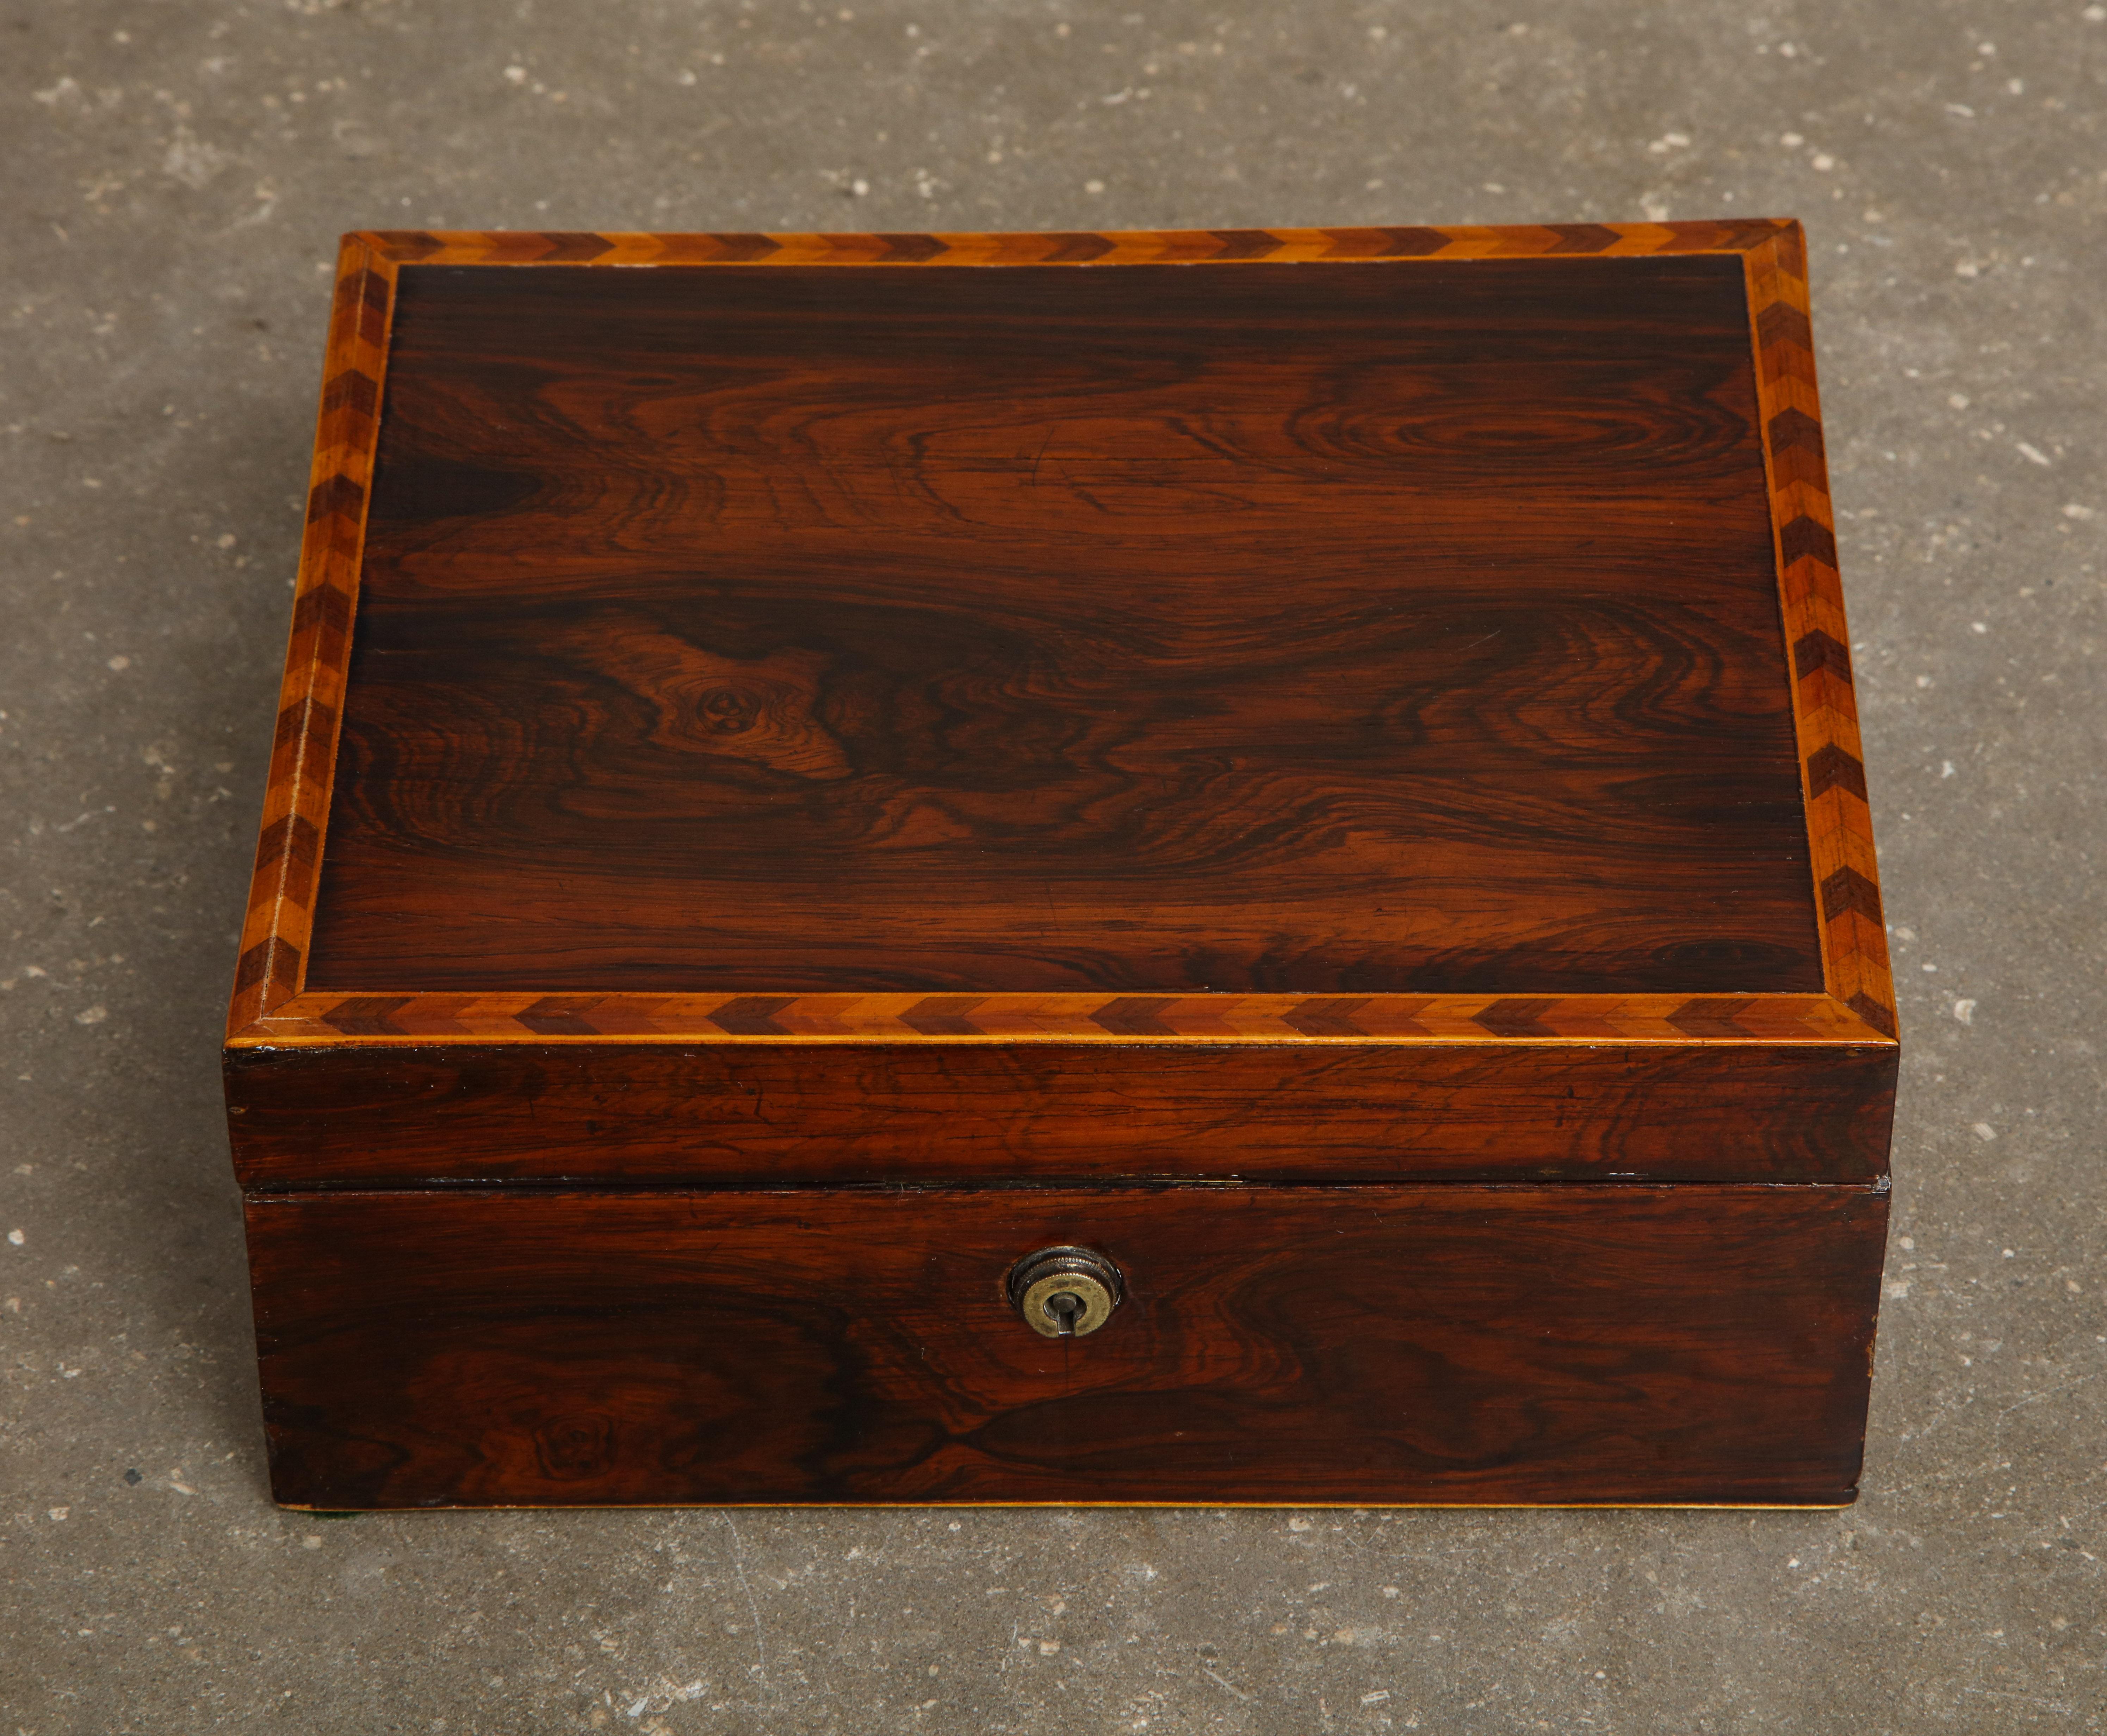 19th century English mahogany trinket box with inlaid border and lined interior. Brass fittings, stamped 